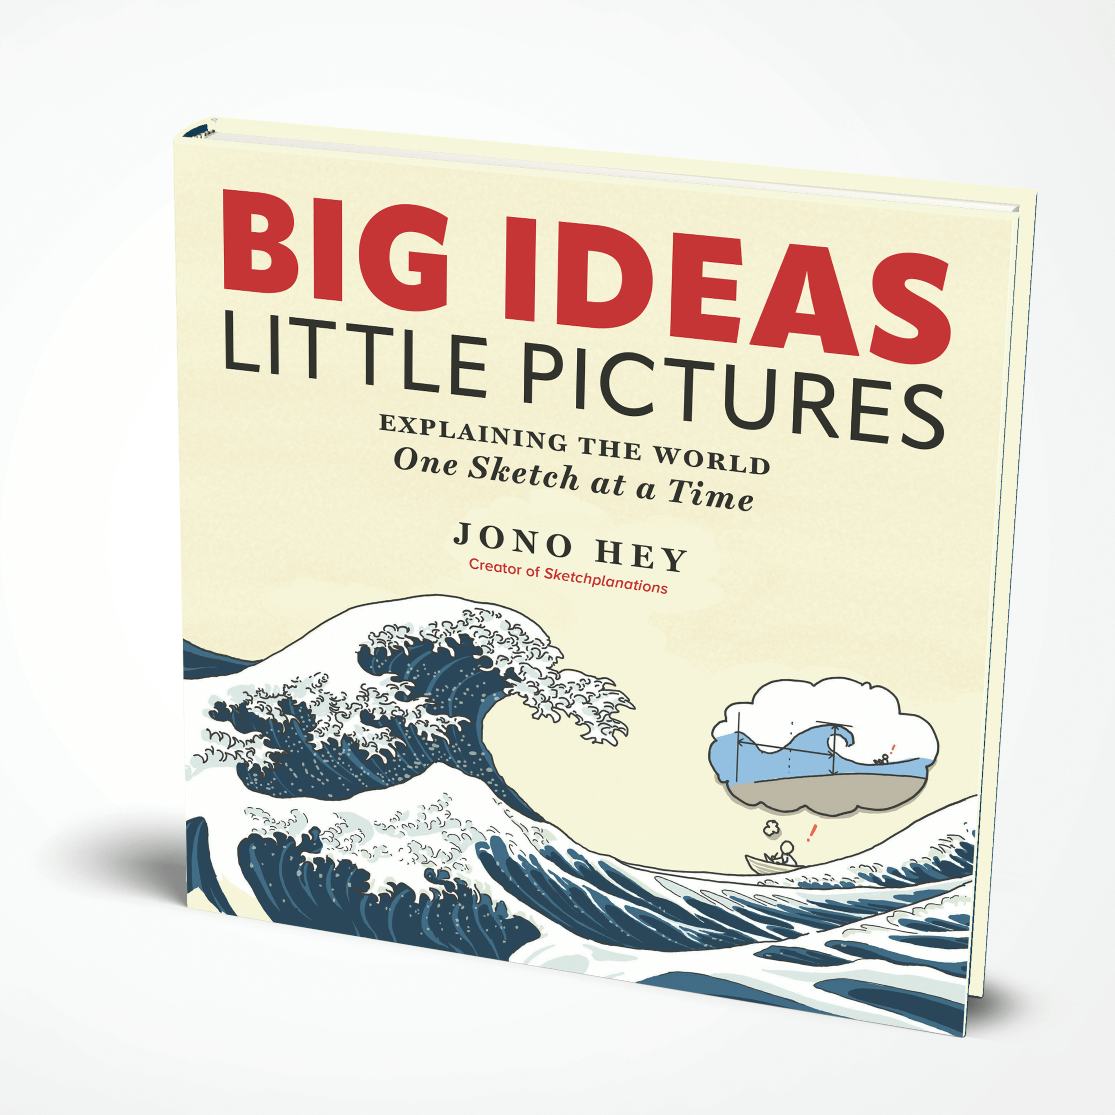 Book cover for Big Ideas Little Pictures book of sketchplanations by Jono Hey